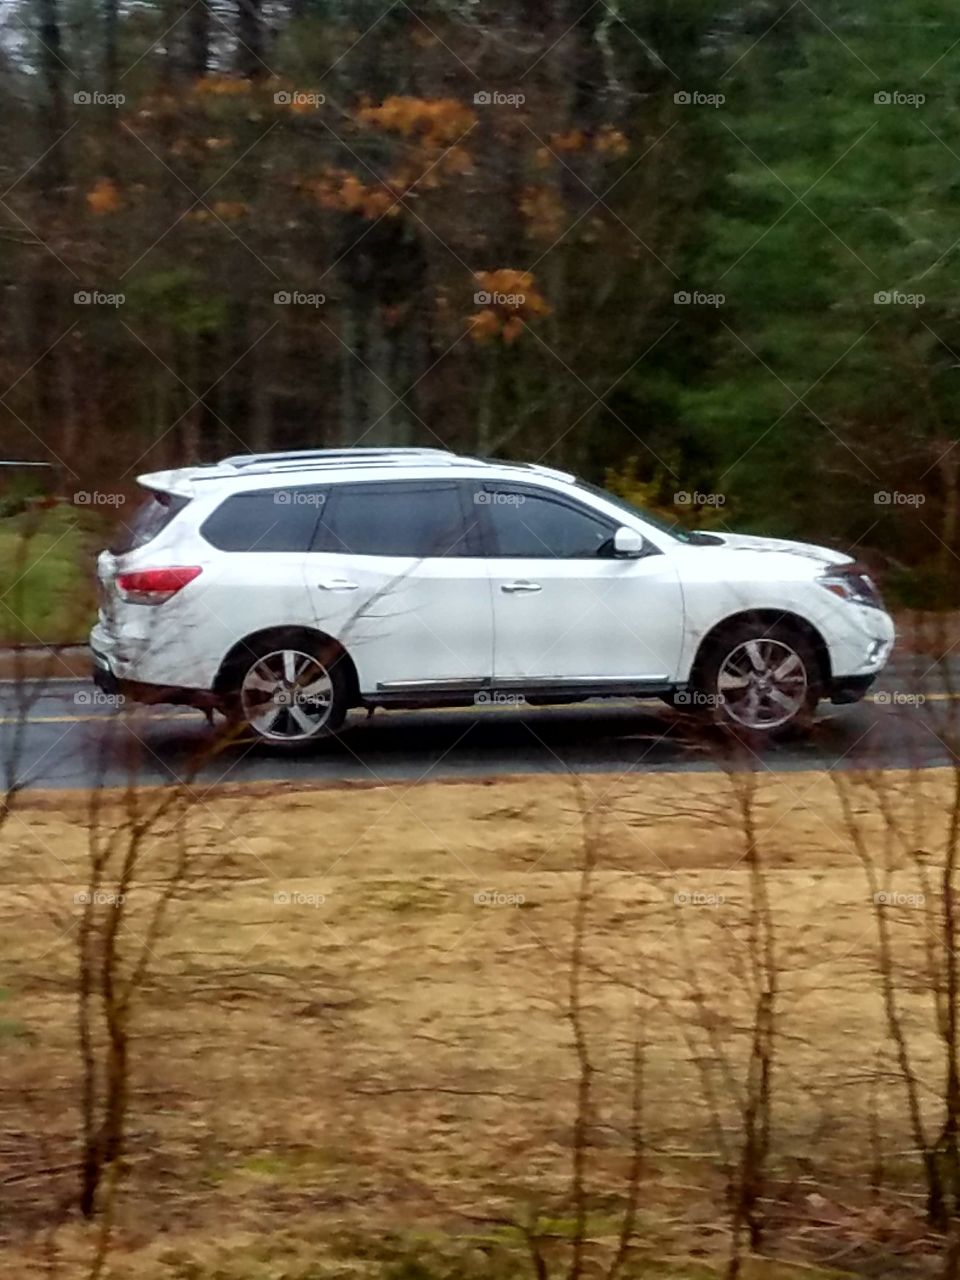 White Nissan Pathfinder SUV driving quickly on road by our house.